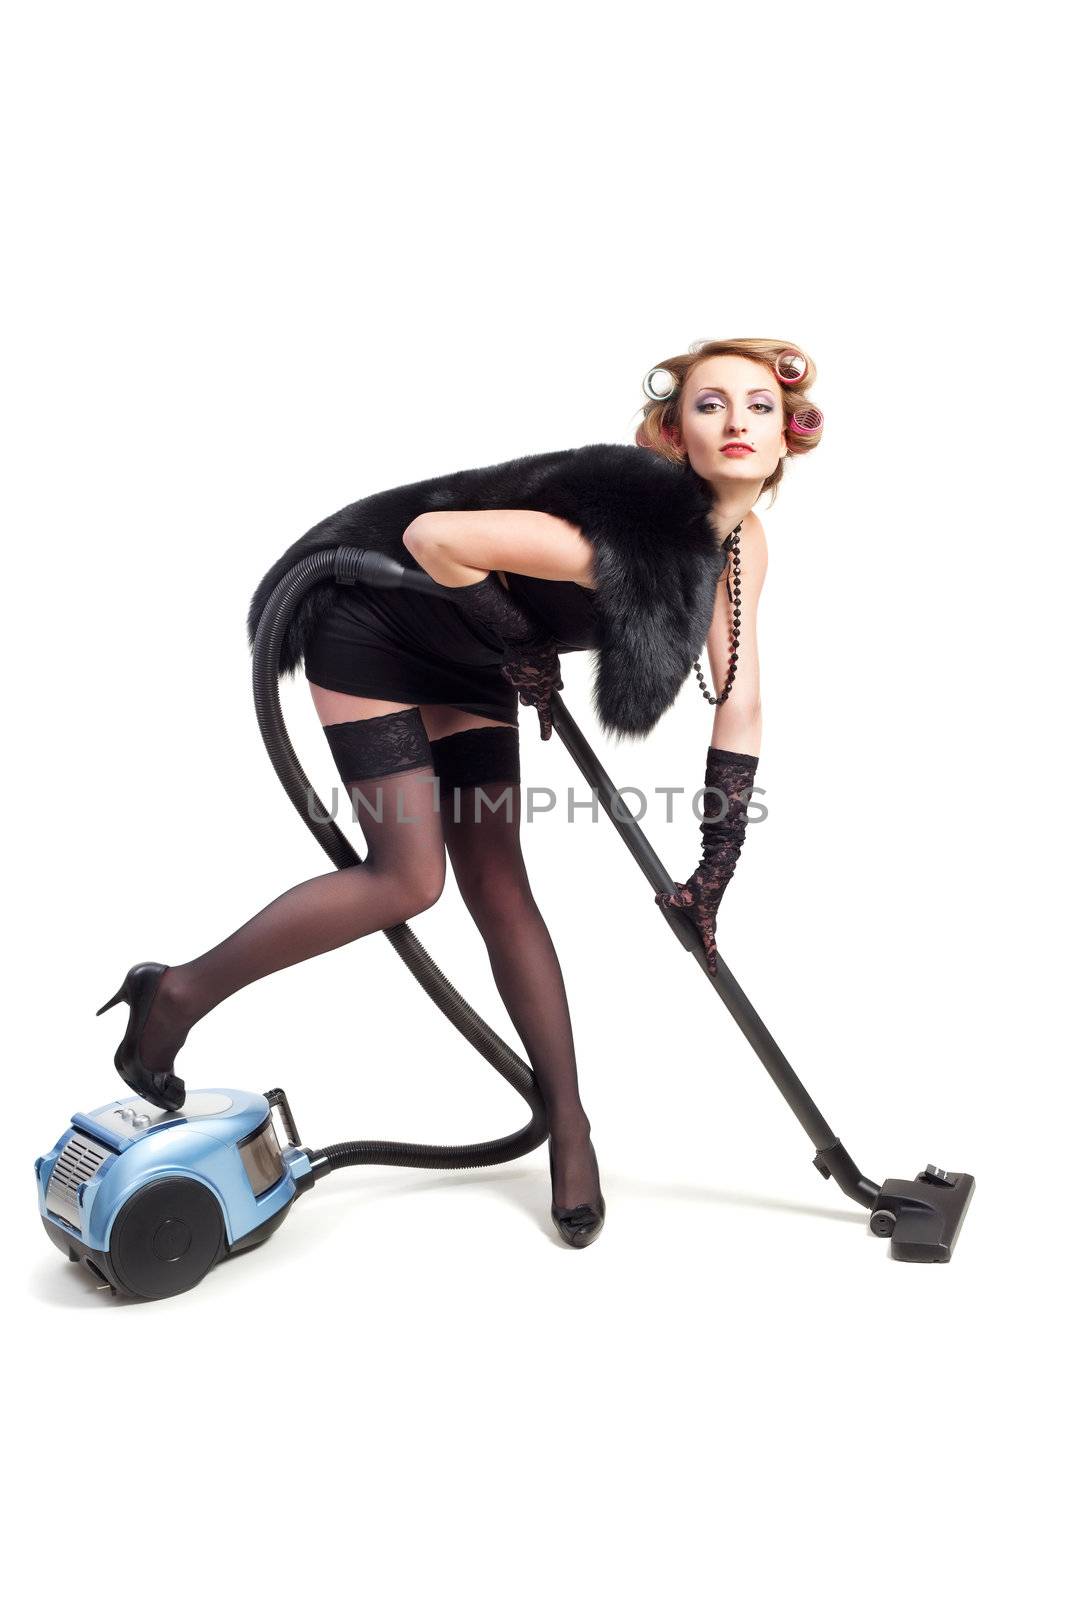 Girl with vacuum cleaner posing for camera